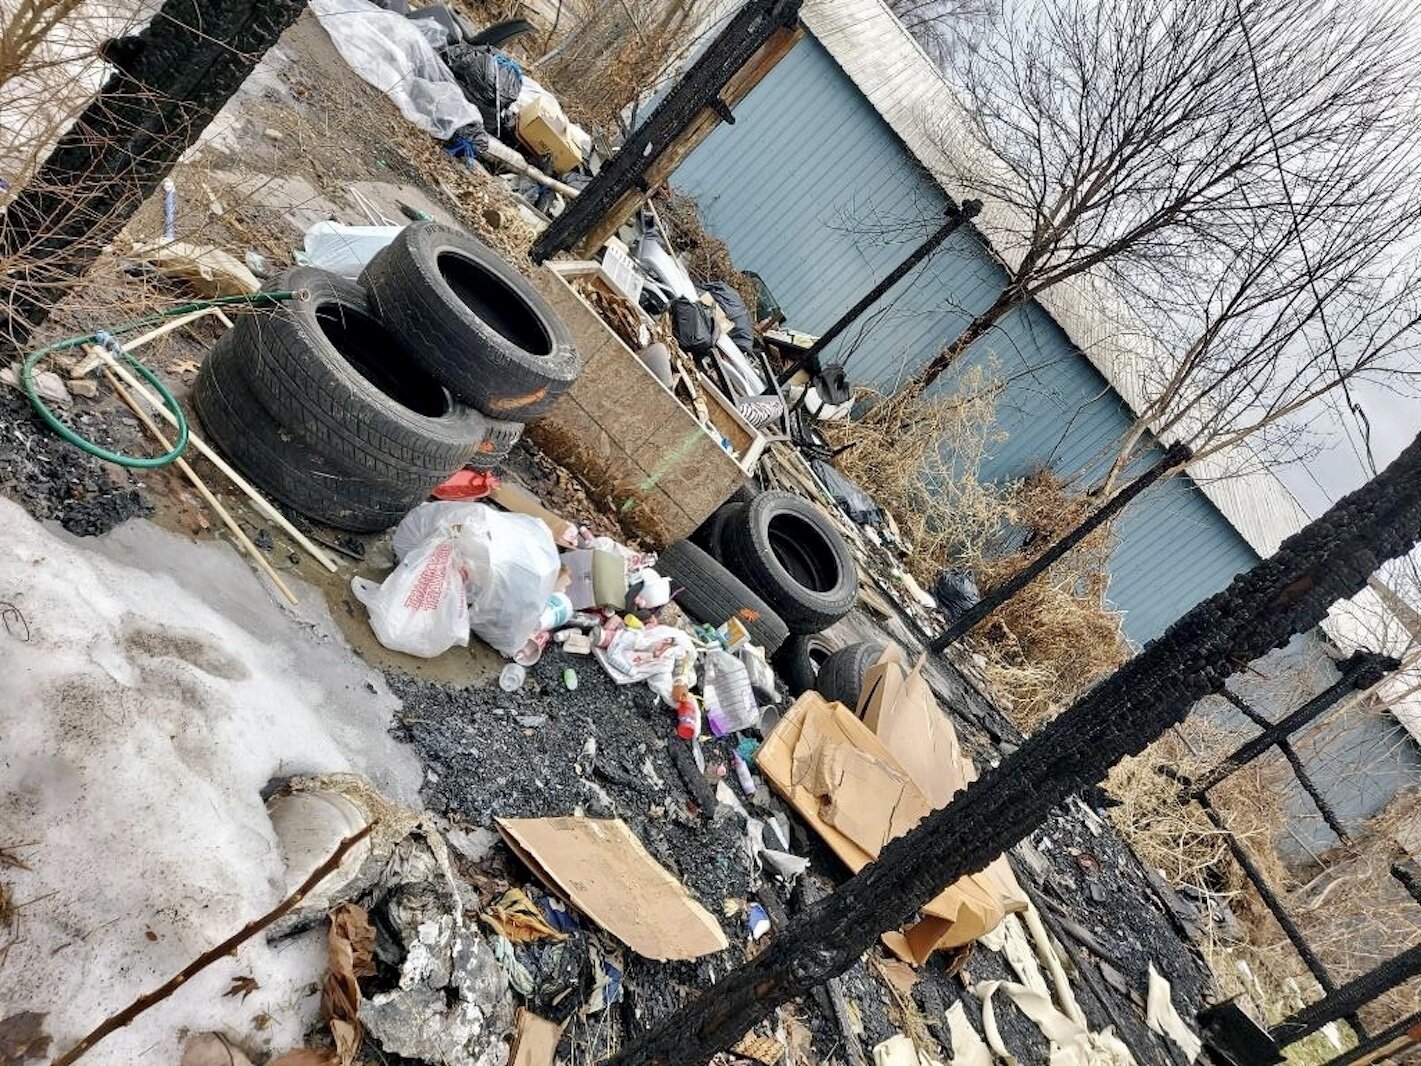 Discarded tires, old pieces of wood and other trash can be seen in the backyard of a house where illegal dumping has occurred in the 800 block of East Stockbridge Avenue. Courtesy of Lanae Newton